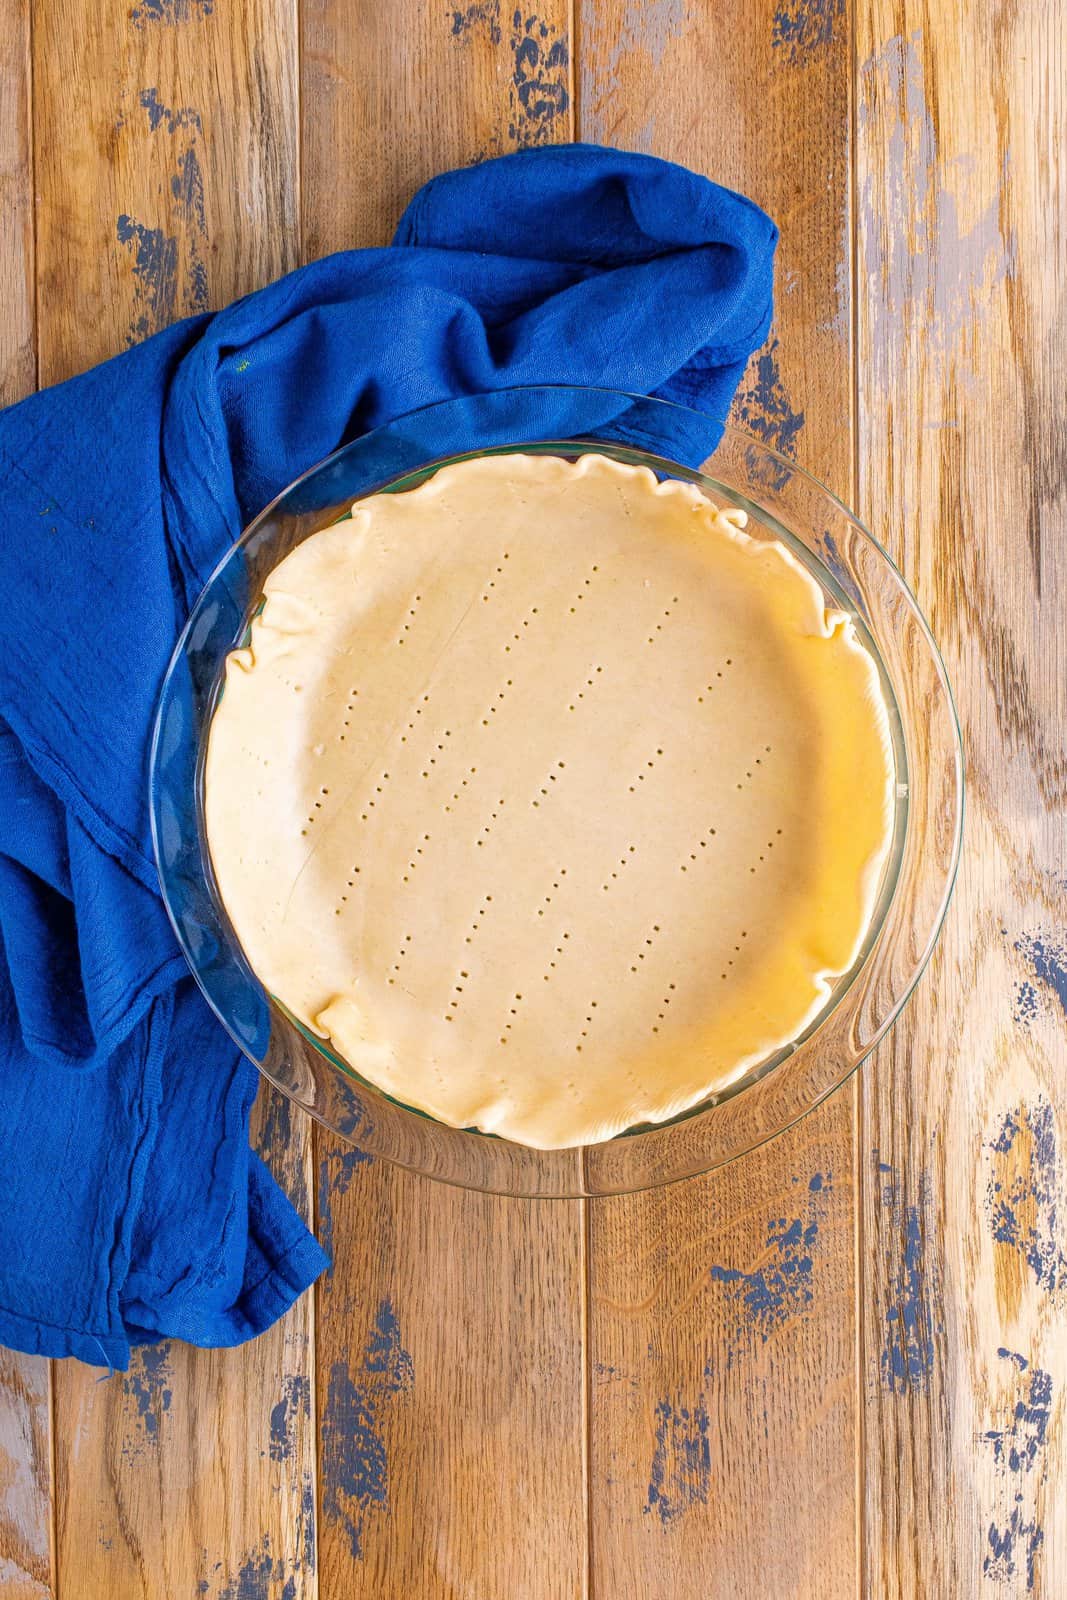 pie crust that has been poked with a fork inside a pie pan.